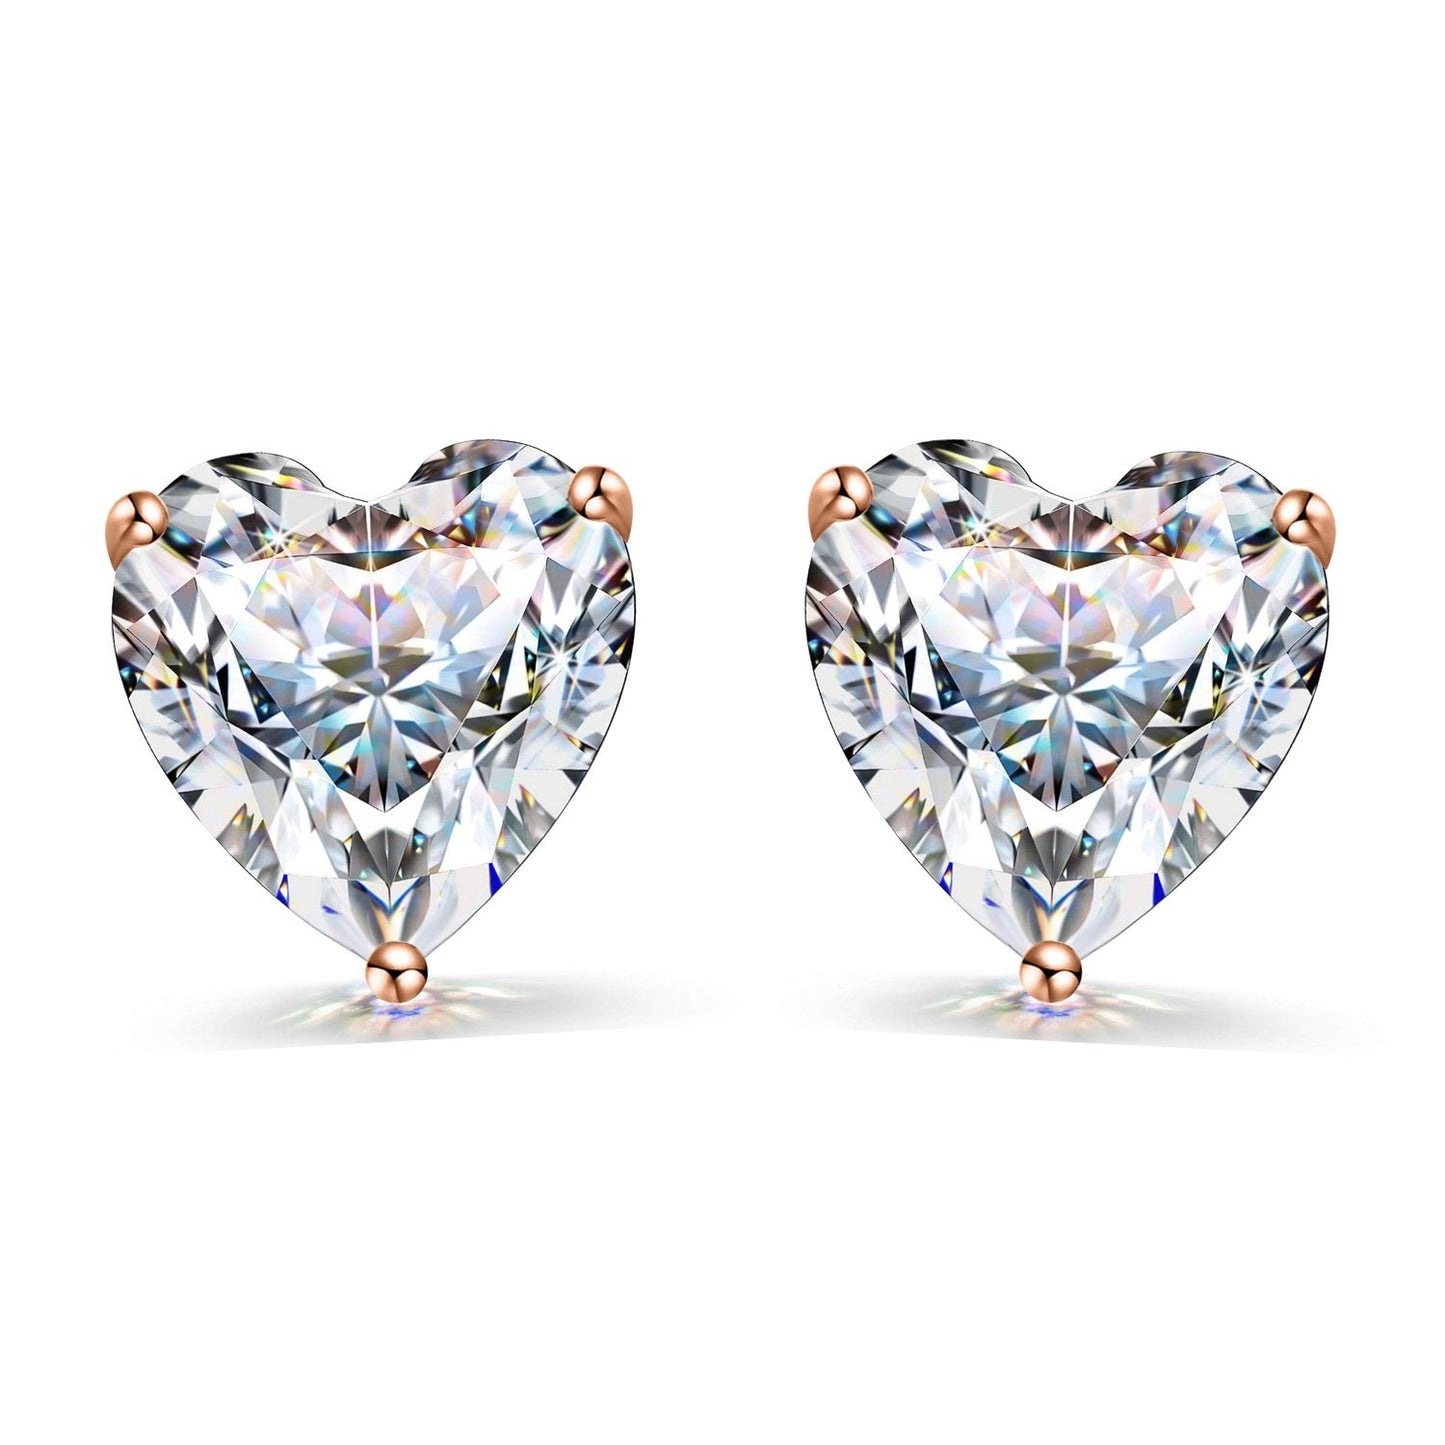 Rose Gold Solitaire Heart Earrings embellished with Swarovski Zirconia - 92.5 Silver in 18K Rose Gold Finish